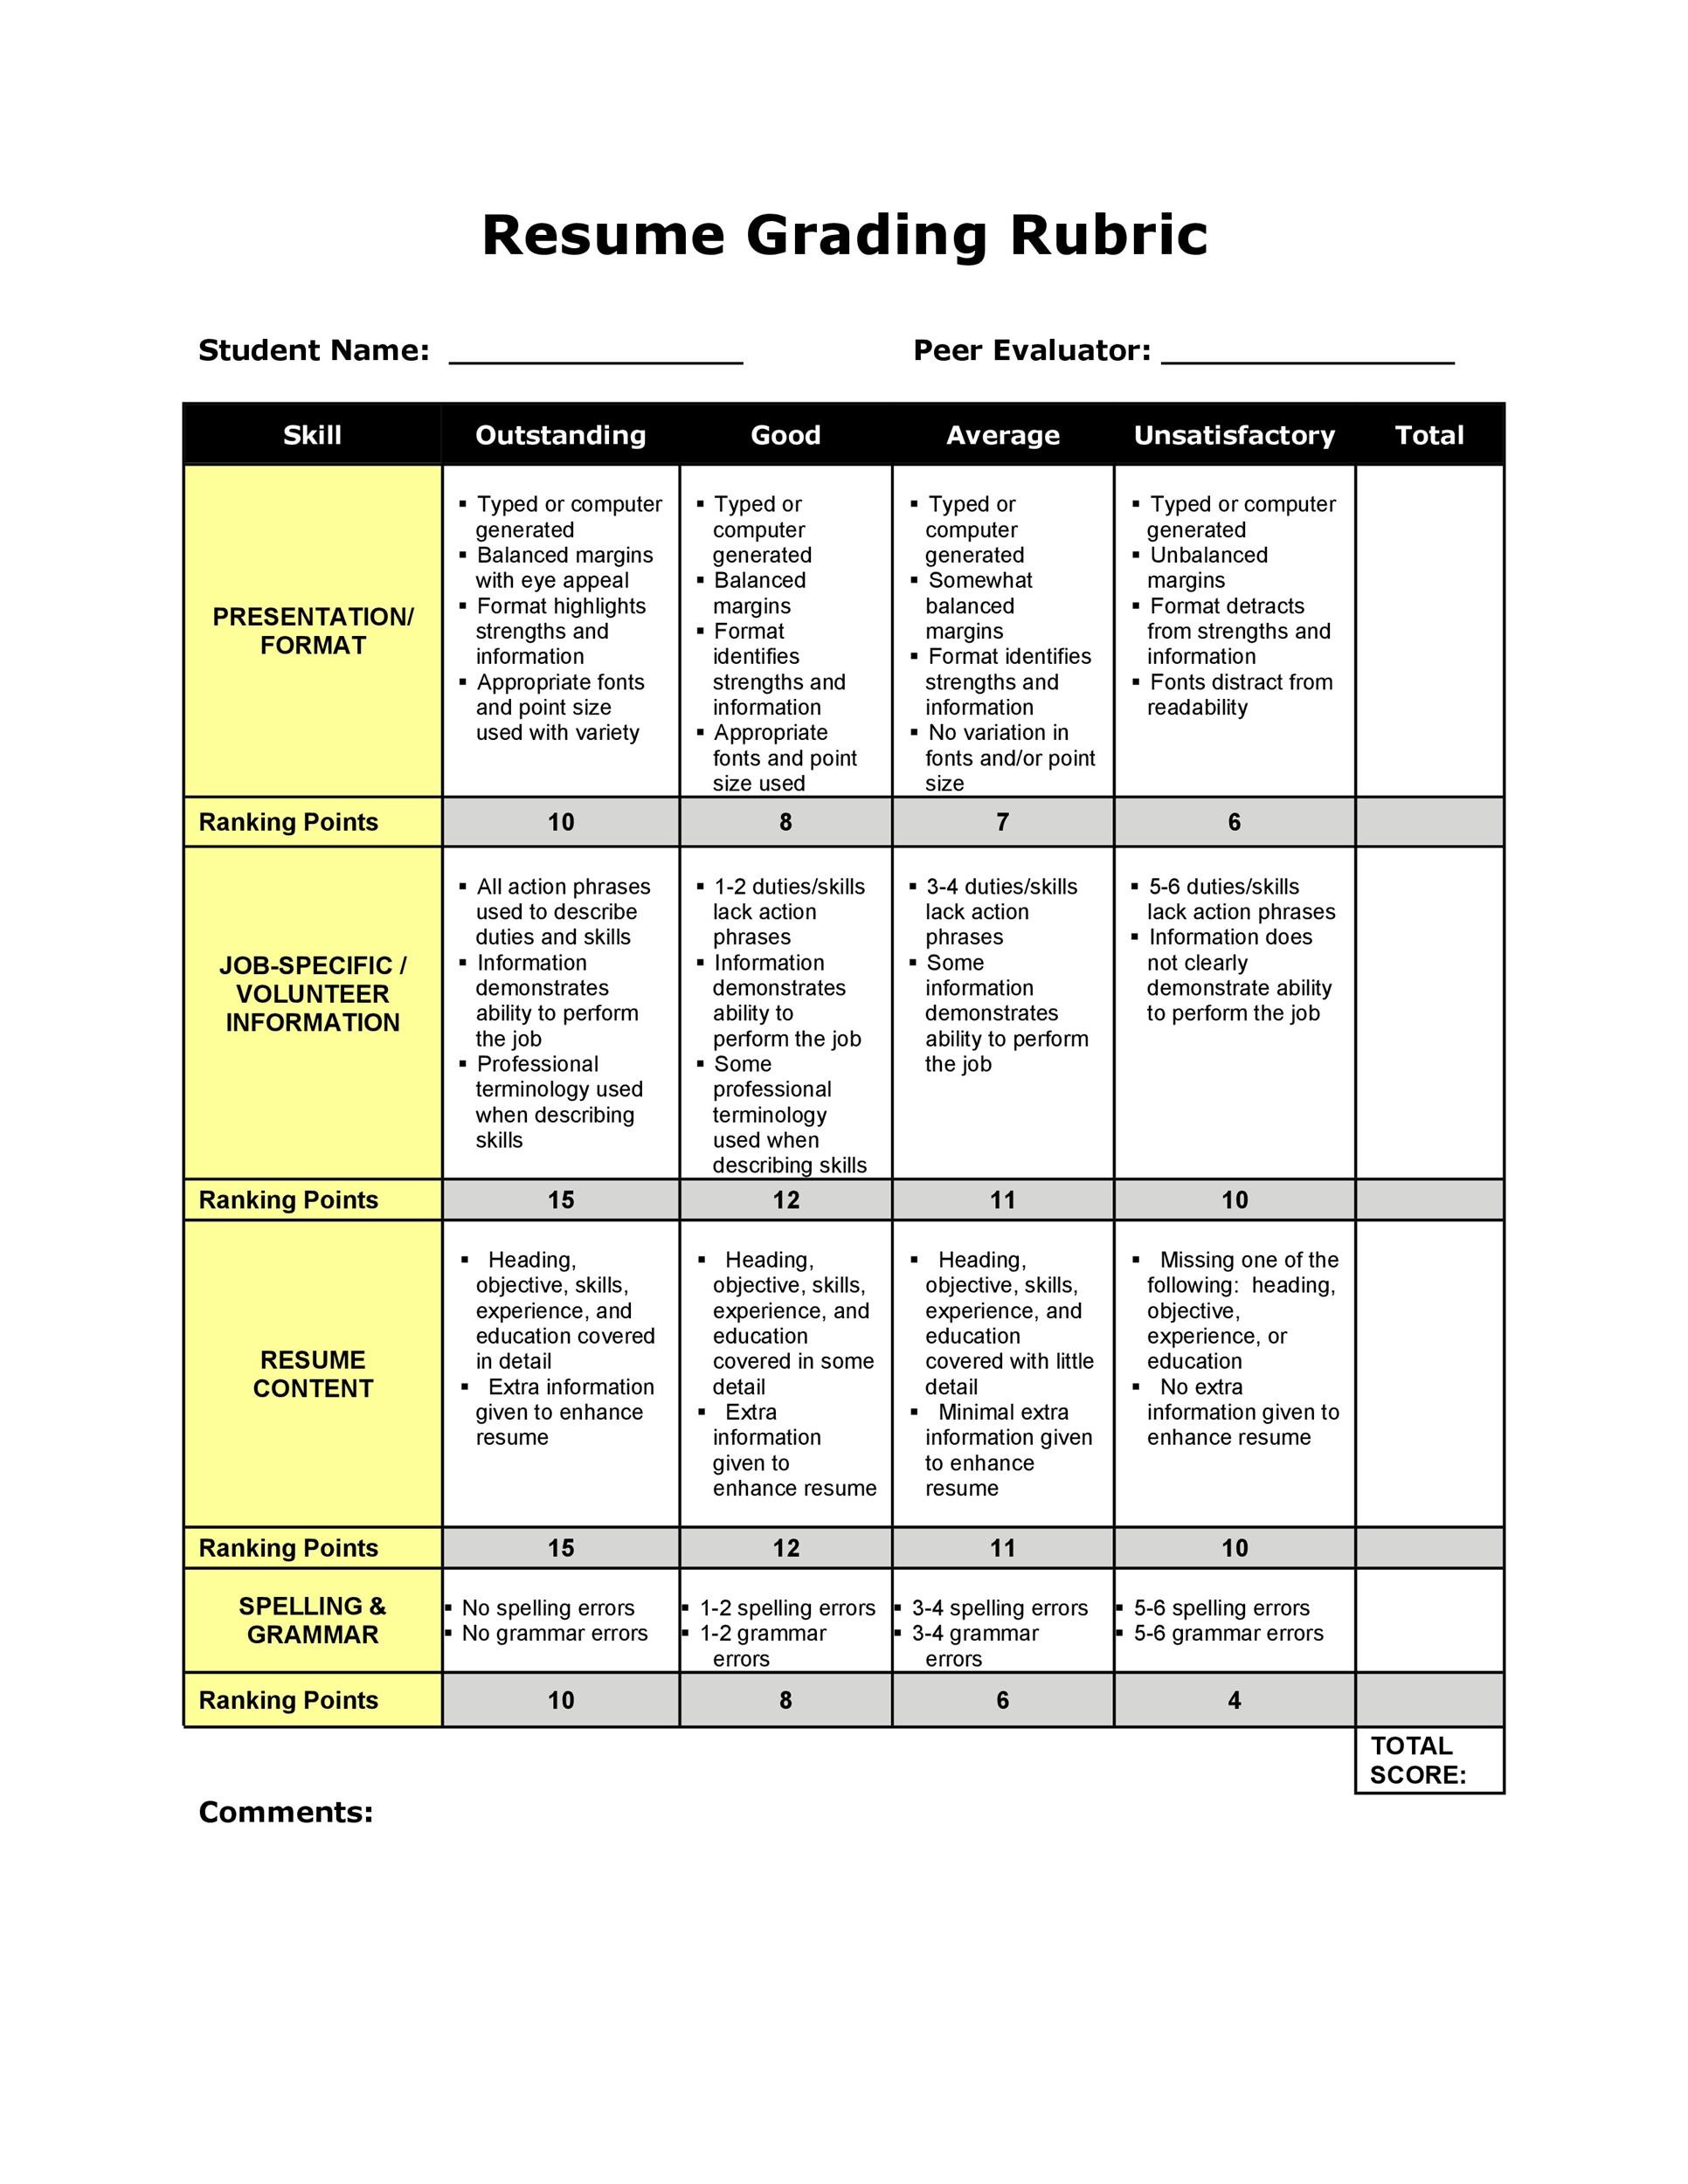 rubric for grading a research paper